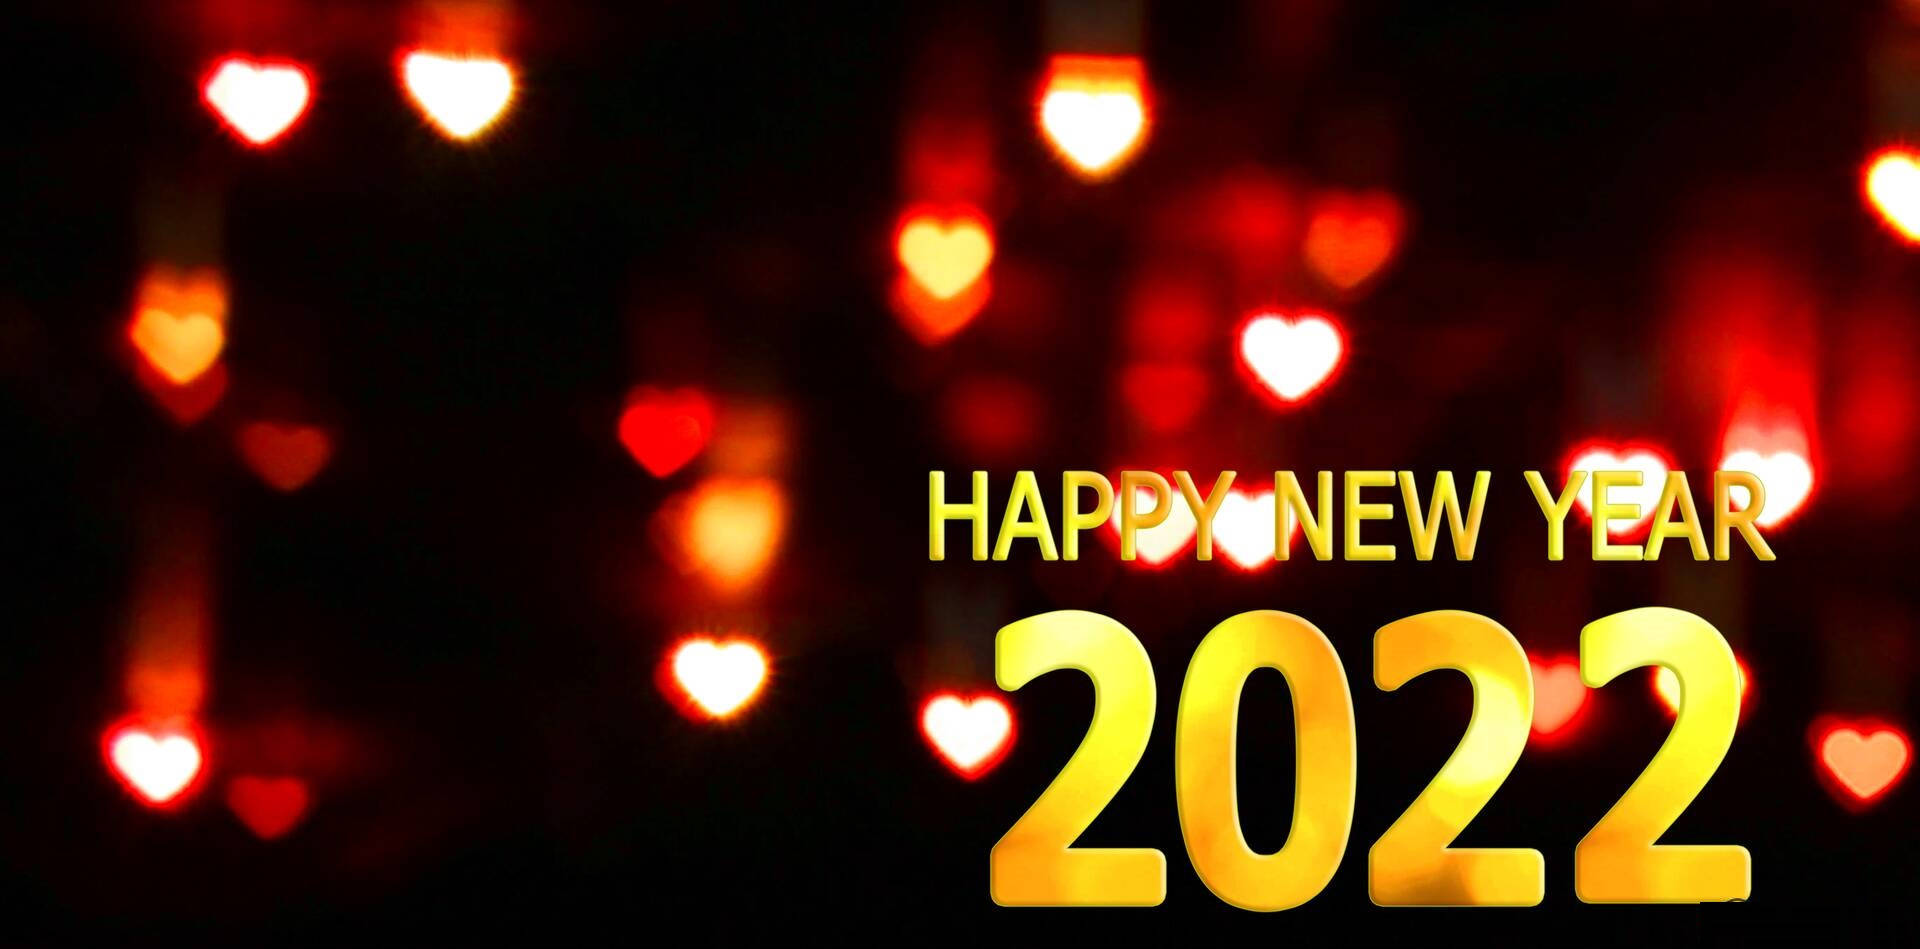 Happy New Year 2022 Heart Light Flare Background